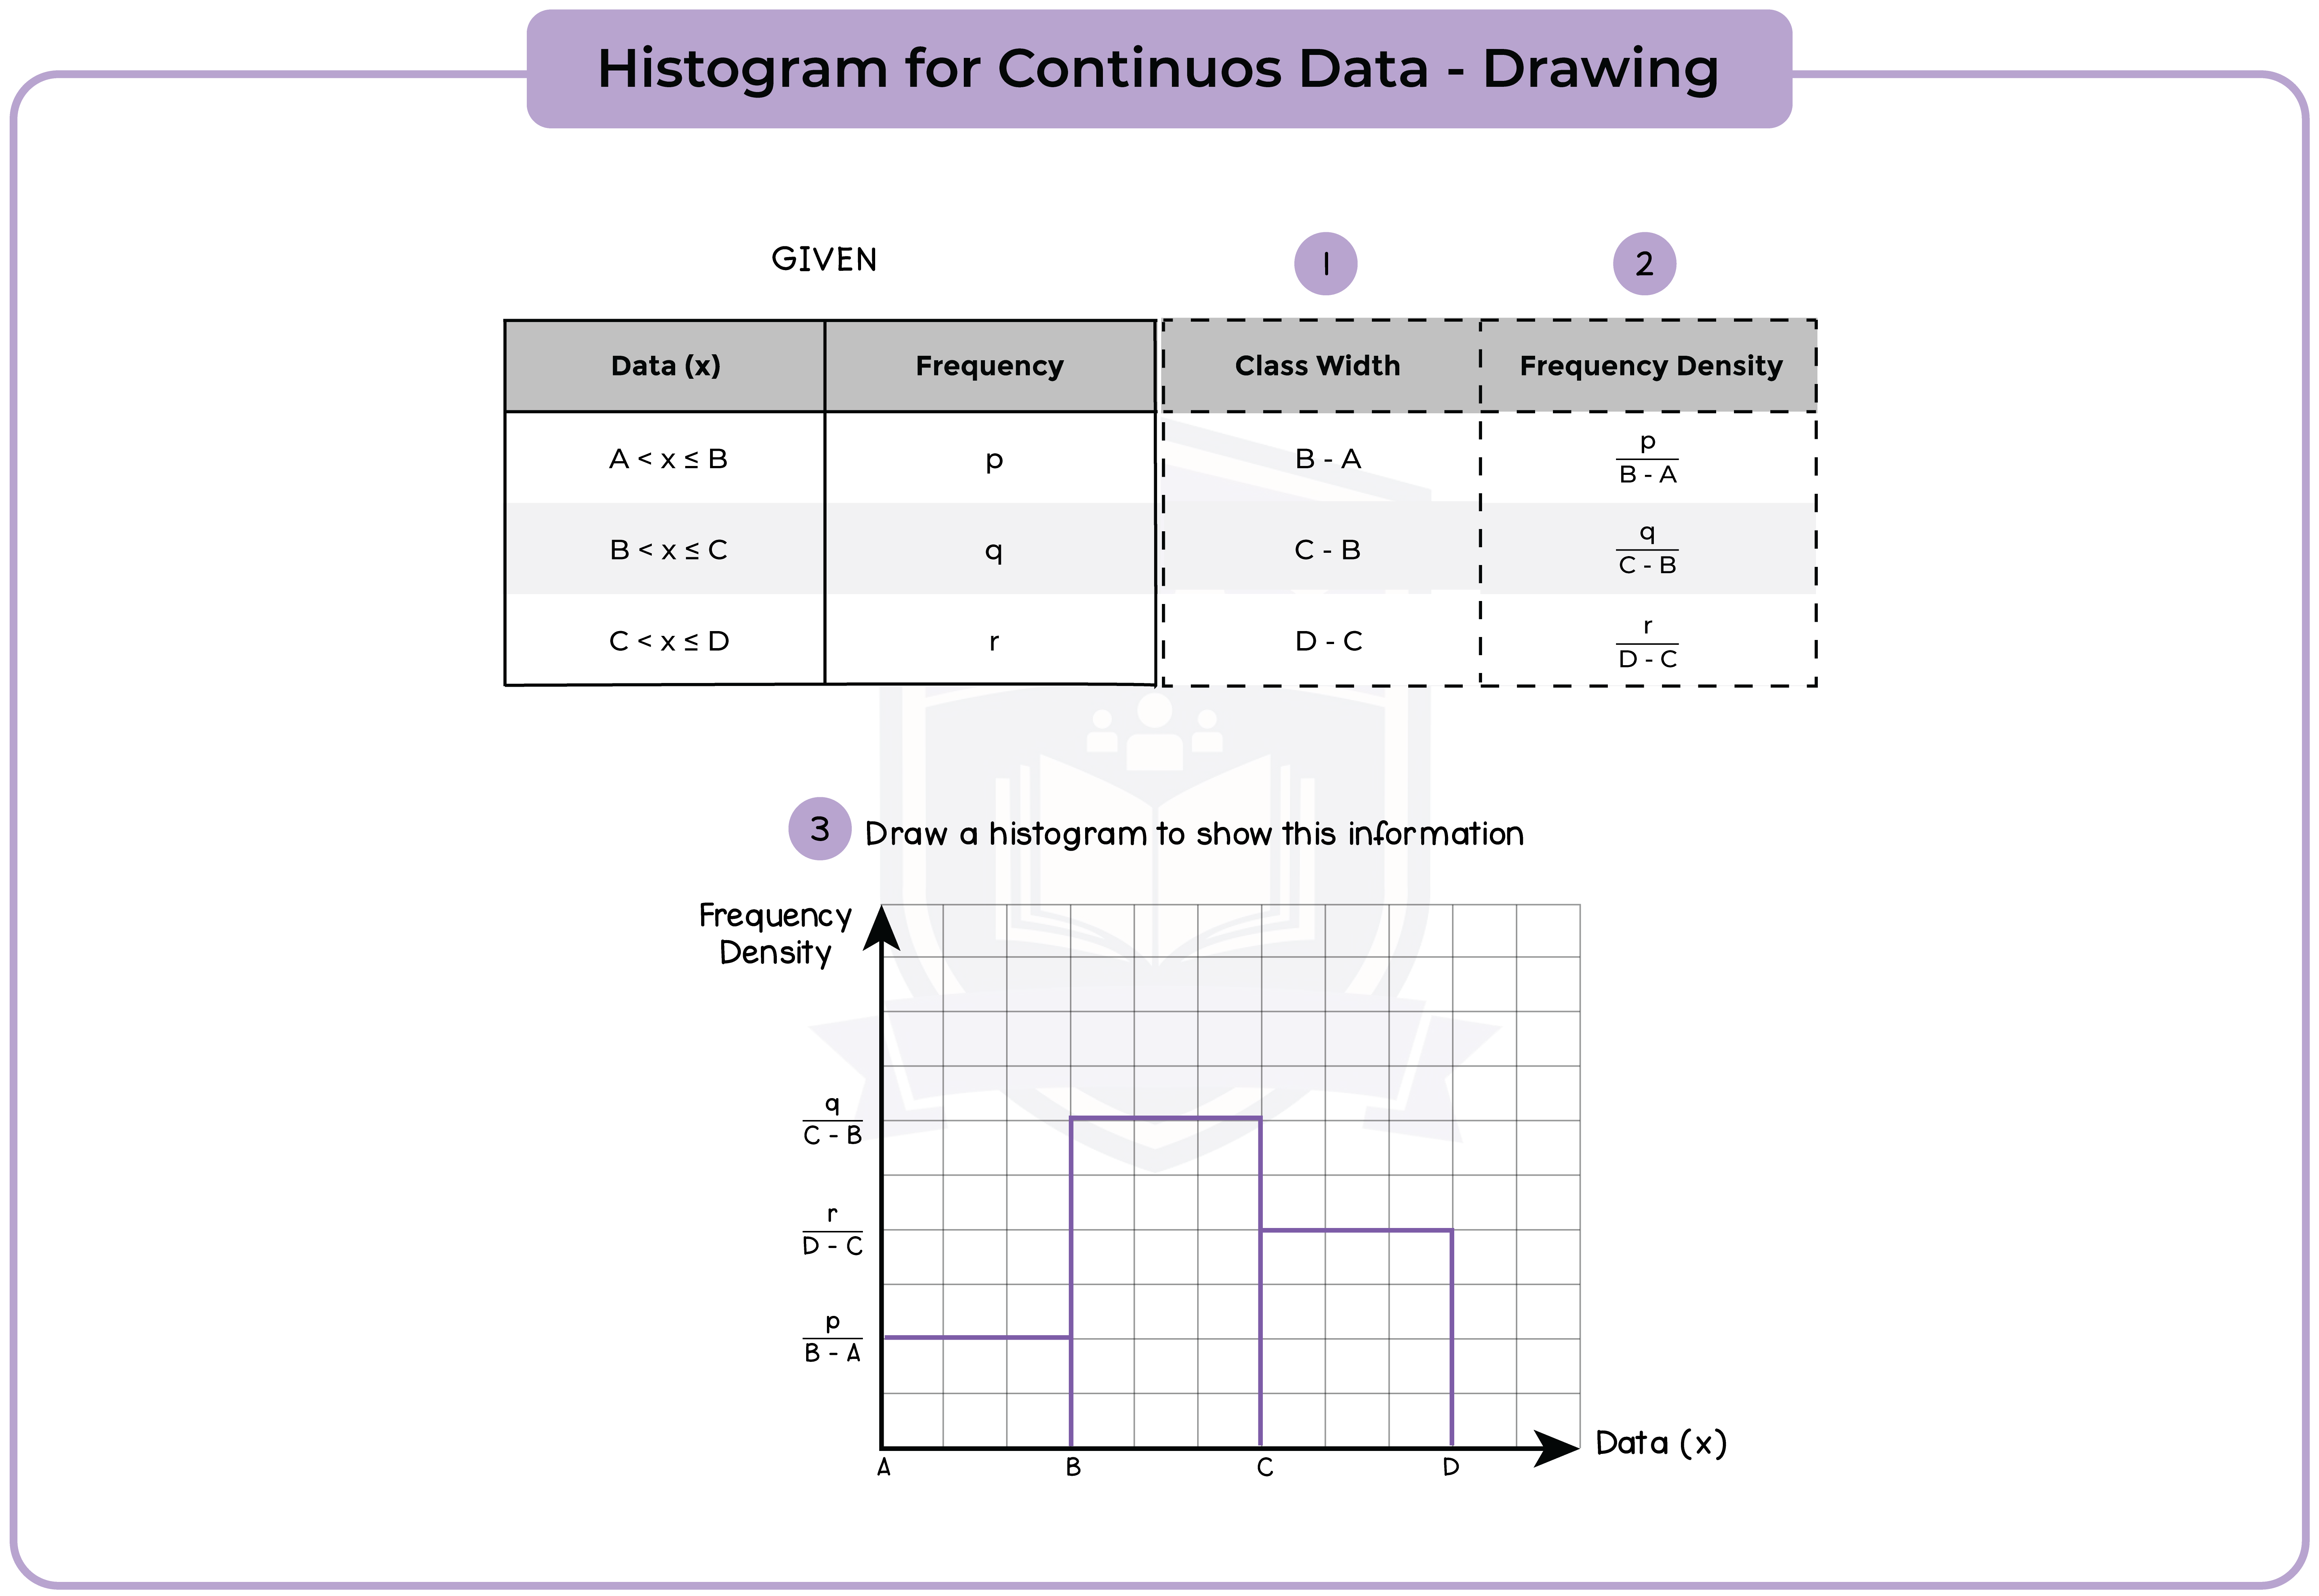 edexcel_igcse_mathematics a_topic 38_graphical representation of data_004_Histogram for Continuous Data - Drawing